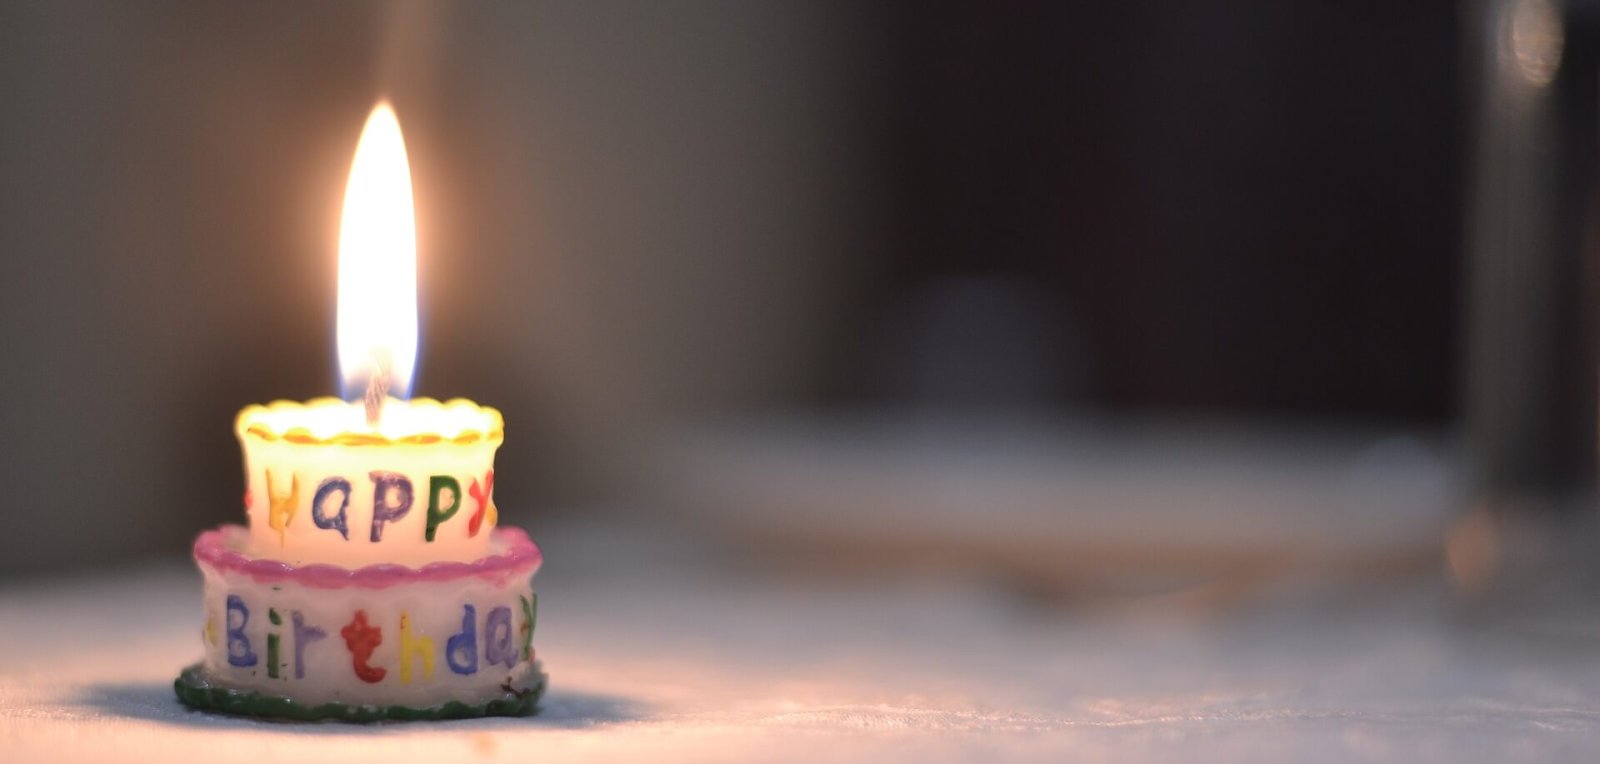 A small birthday cake with a single candle